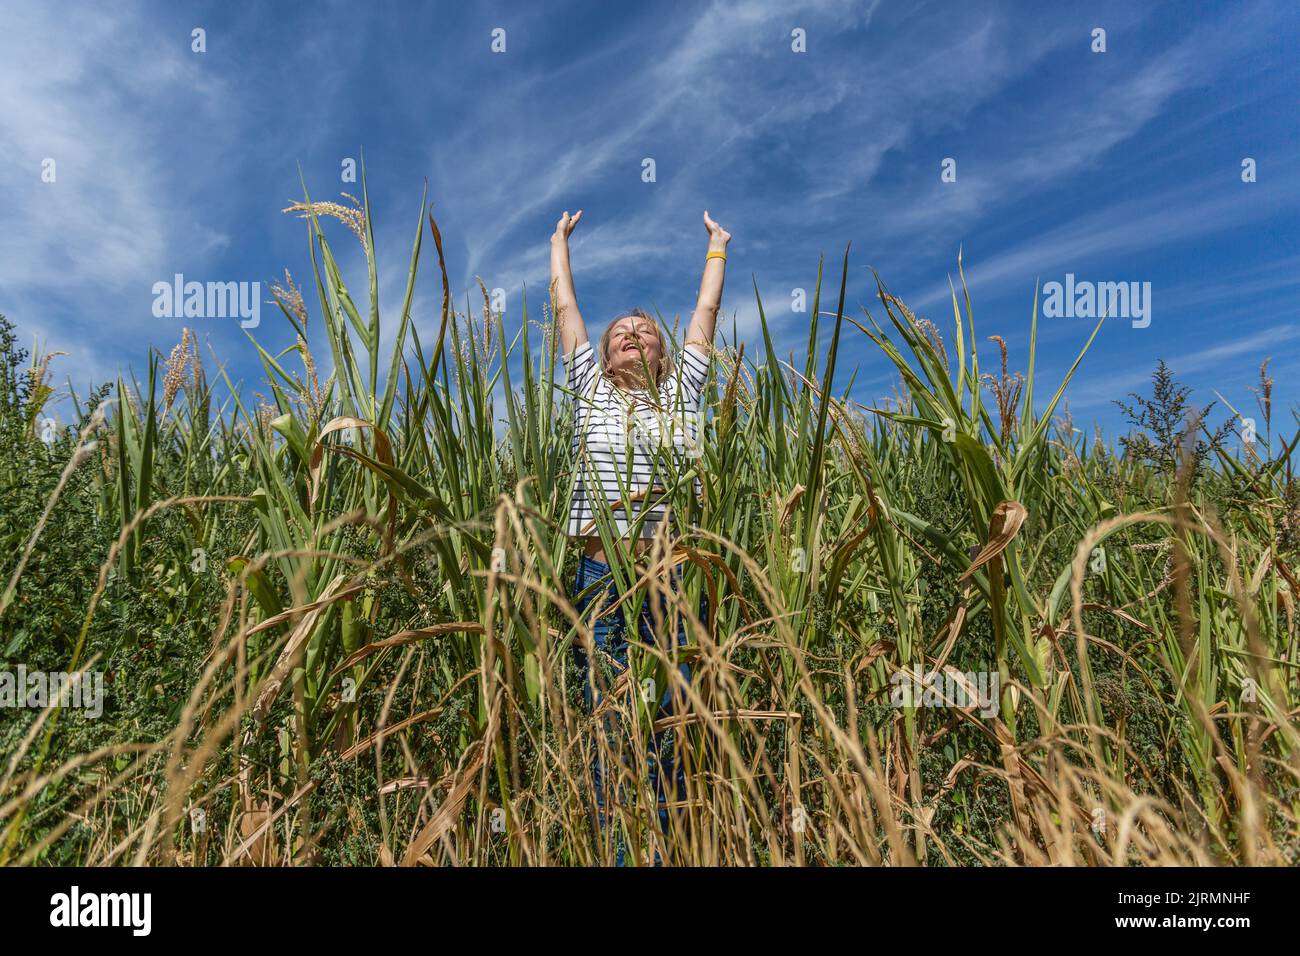 A woman in a field of corn happily reaches for the blue sky Stock Photo